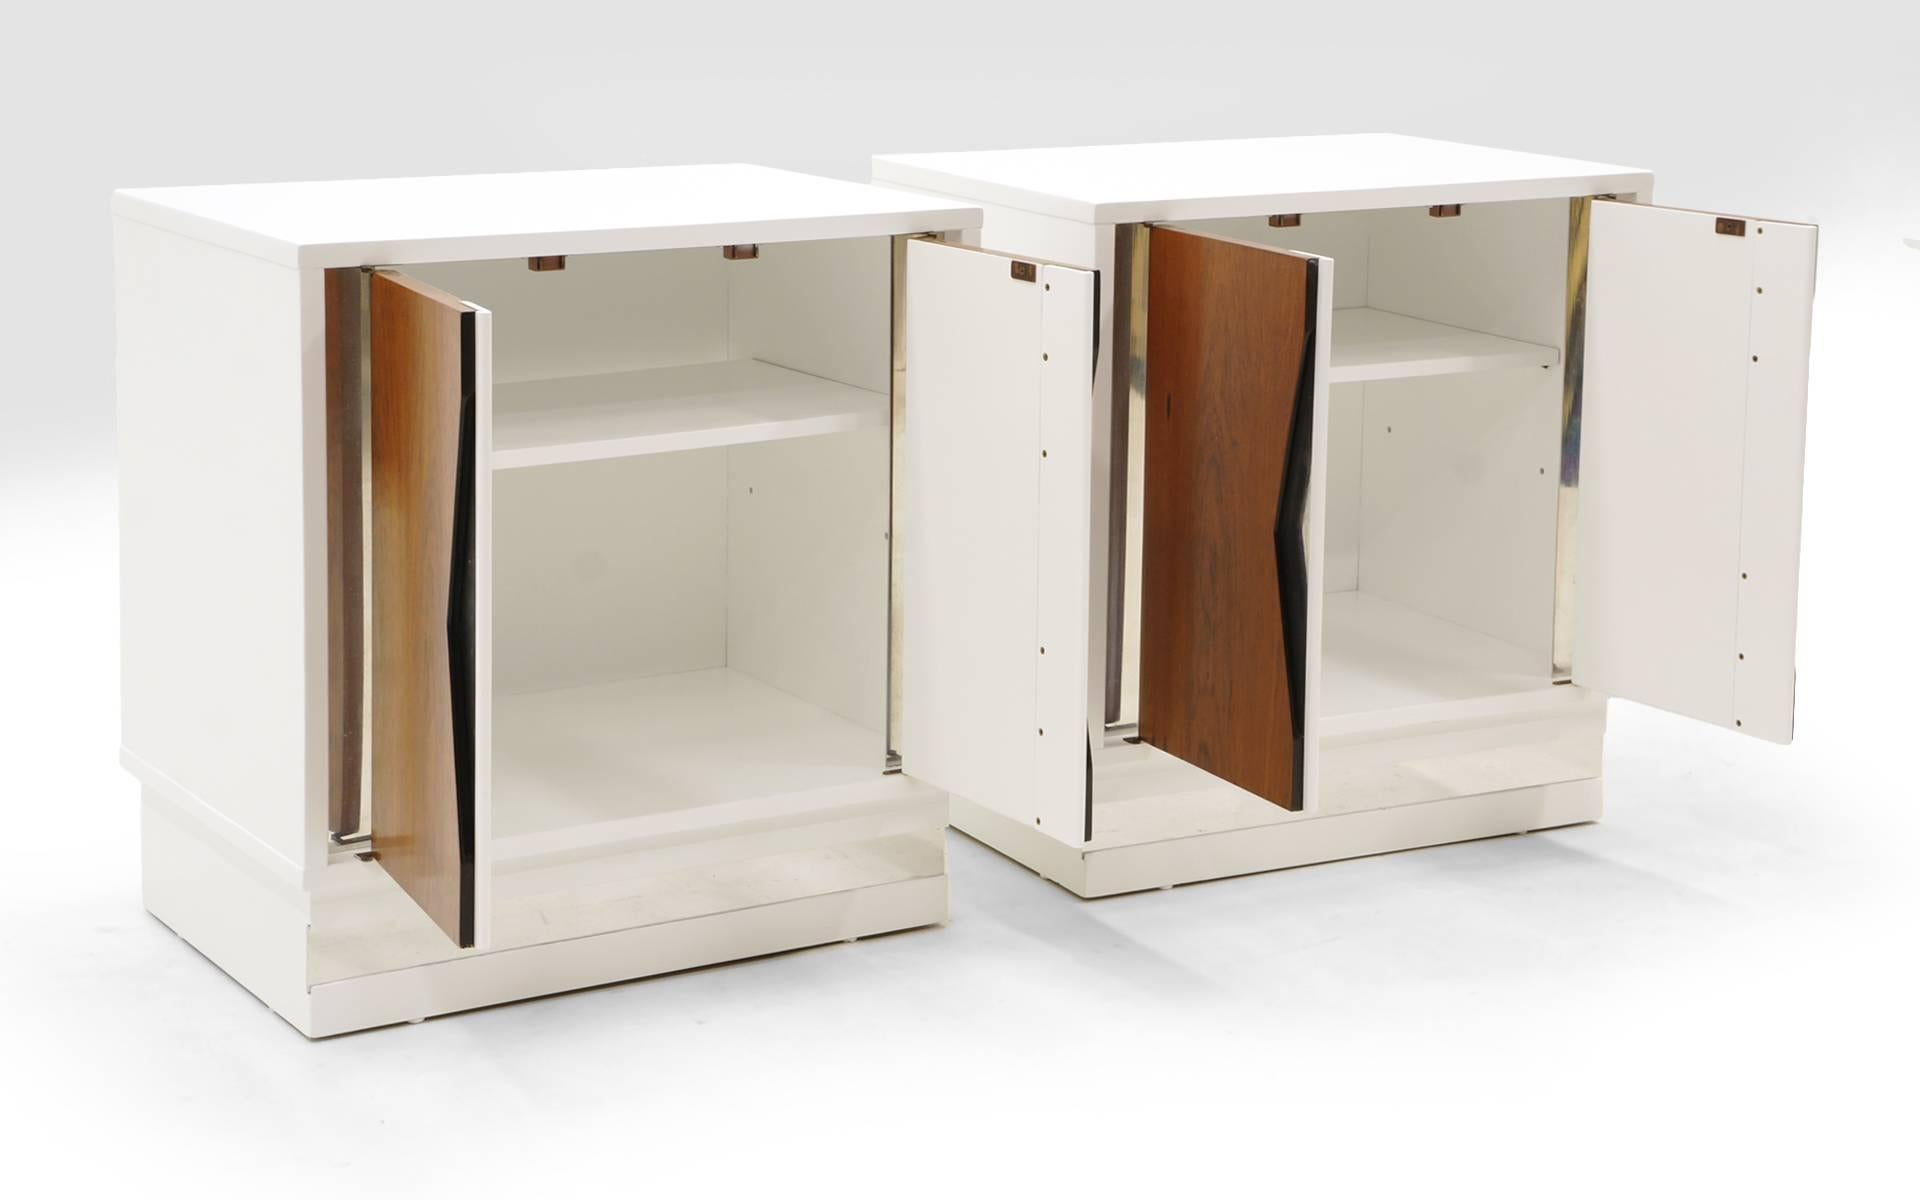 Hollywood Regency Milo Baughman Nightstands, Pair, White Lacquer and Rosewood with Chrome Accents